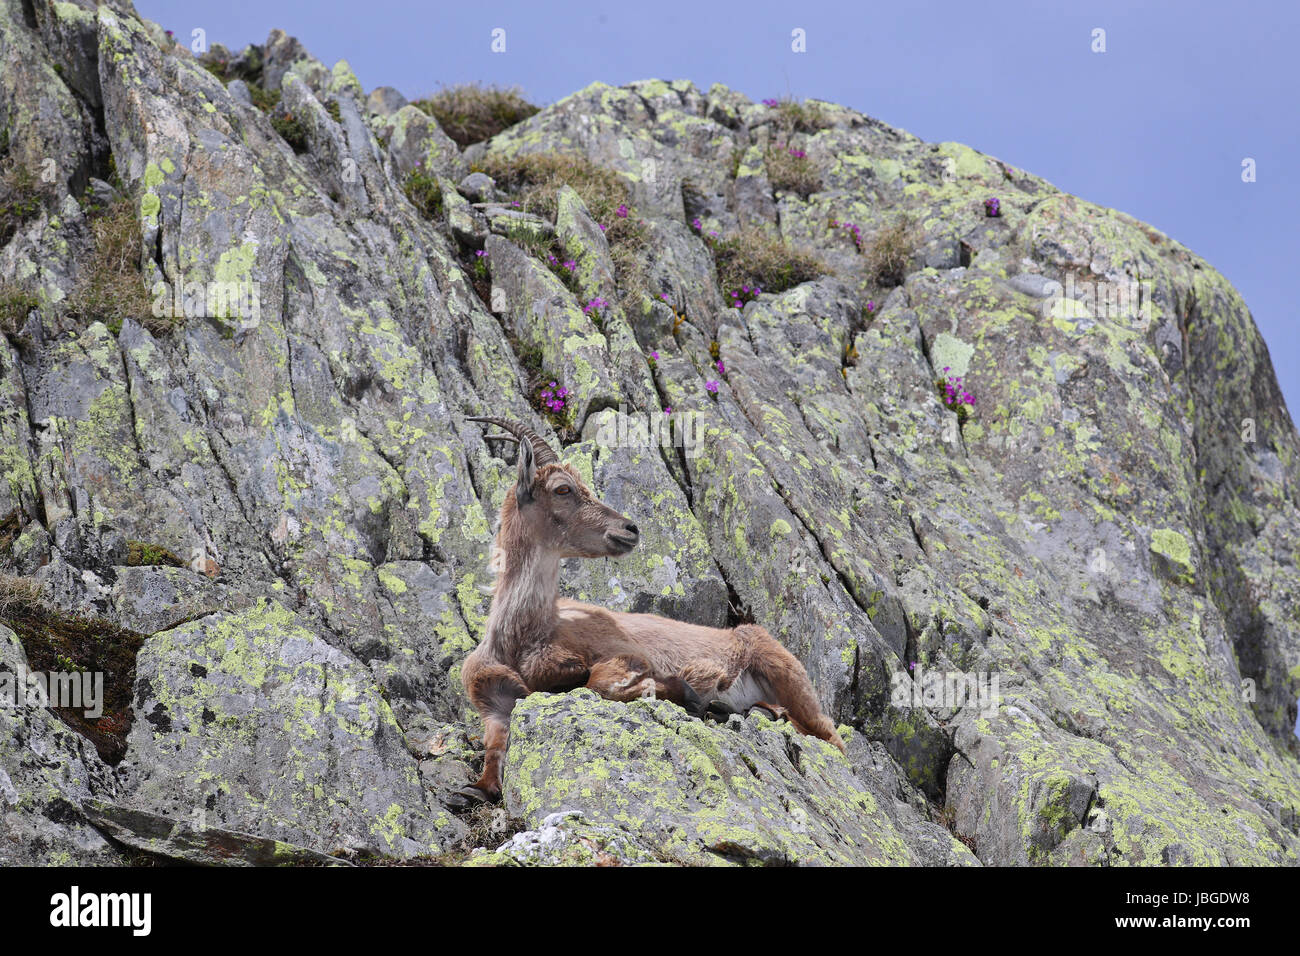 Ibex, Capra Ibex, laying on high mountain cliffs with blue sky and flowers Stock Photo